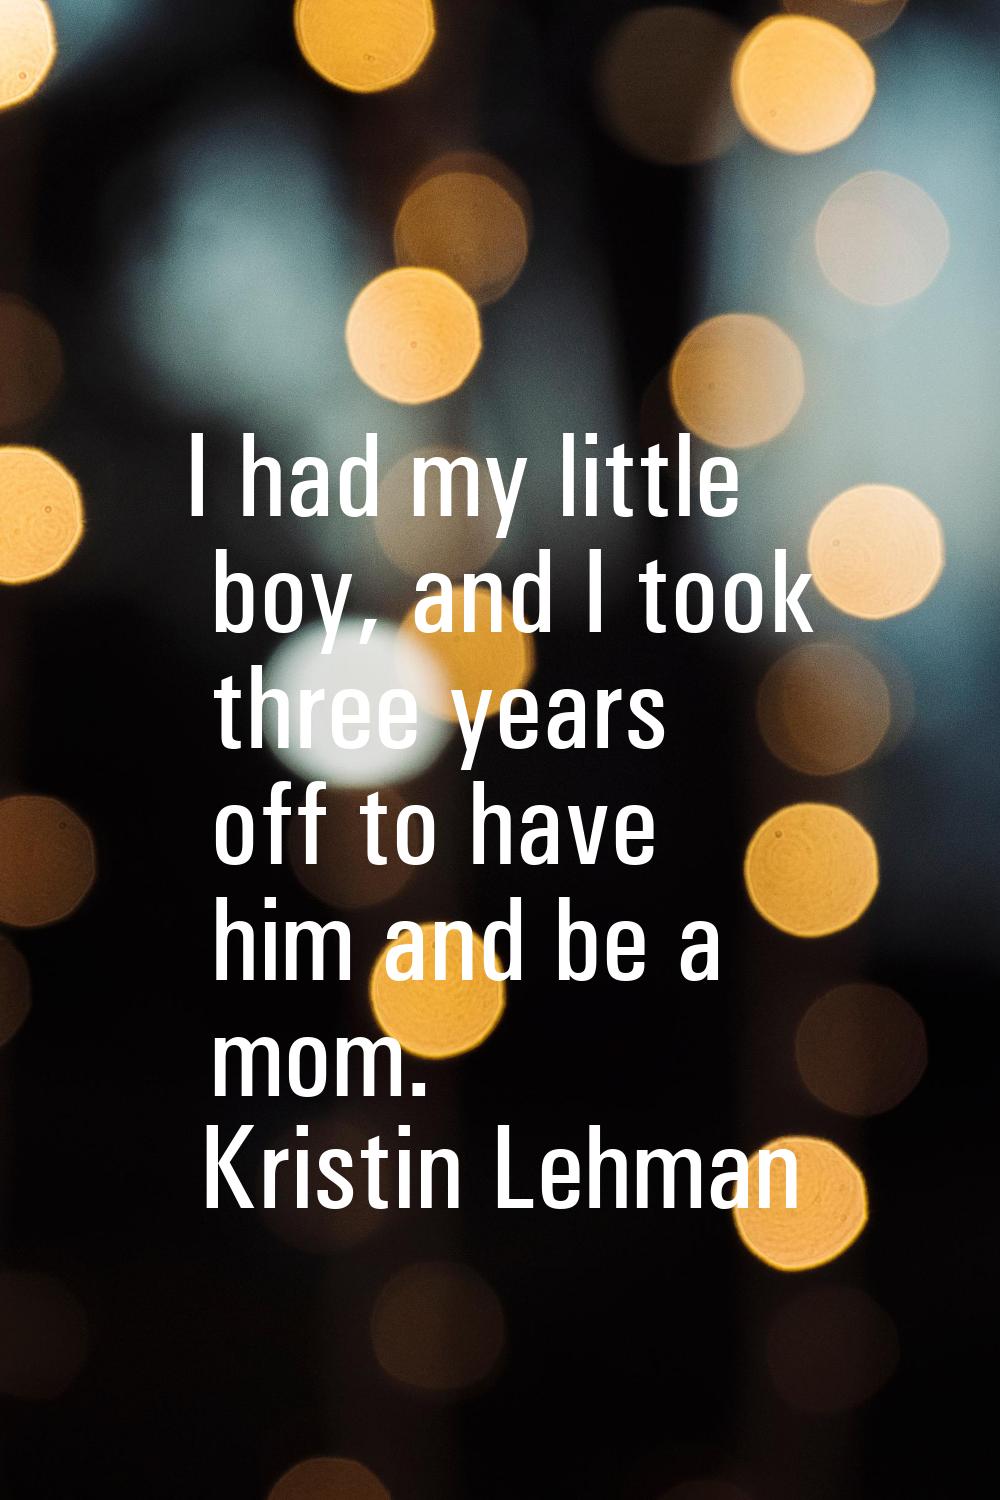 I had my little boy, and I took three years off to have him and be a mom.